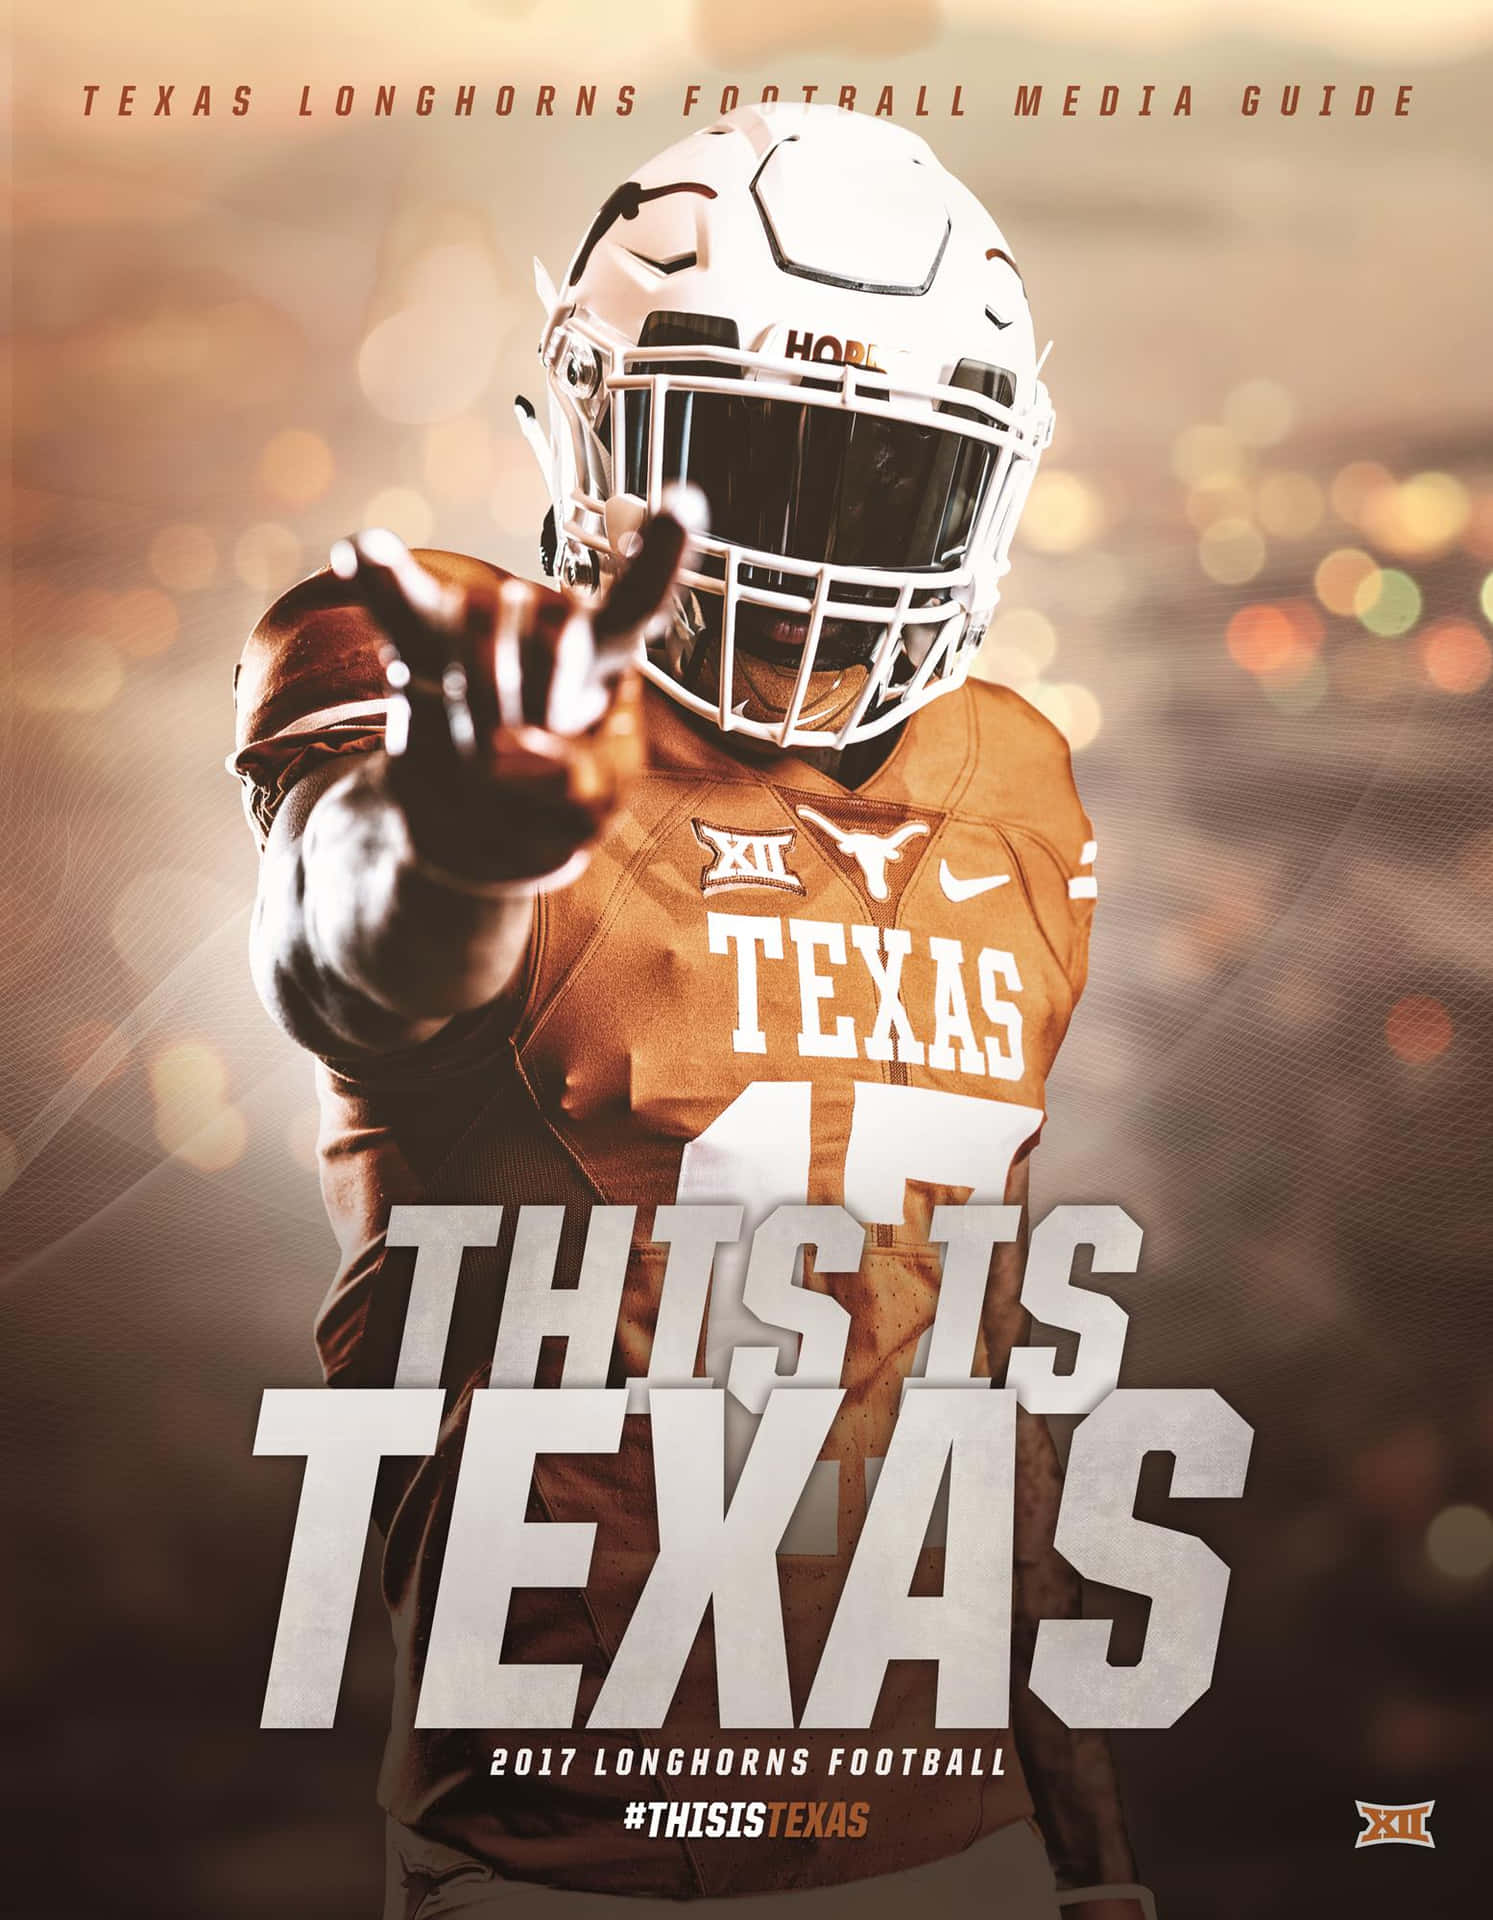 Texas football season is here and it's time to hit the field! Wallpaper